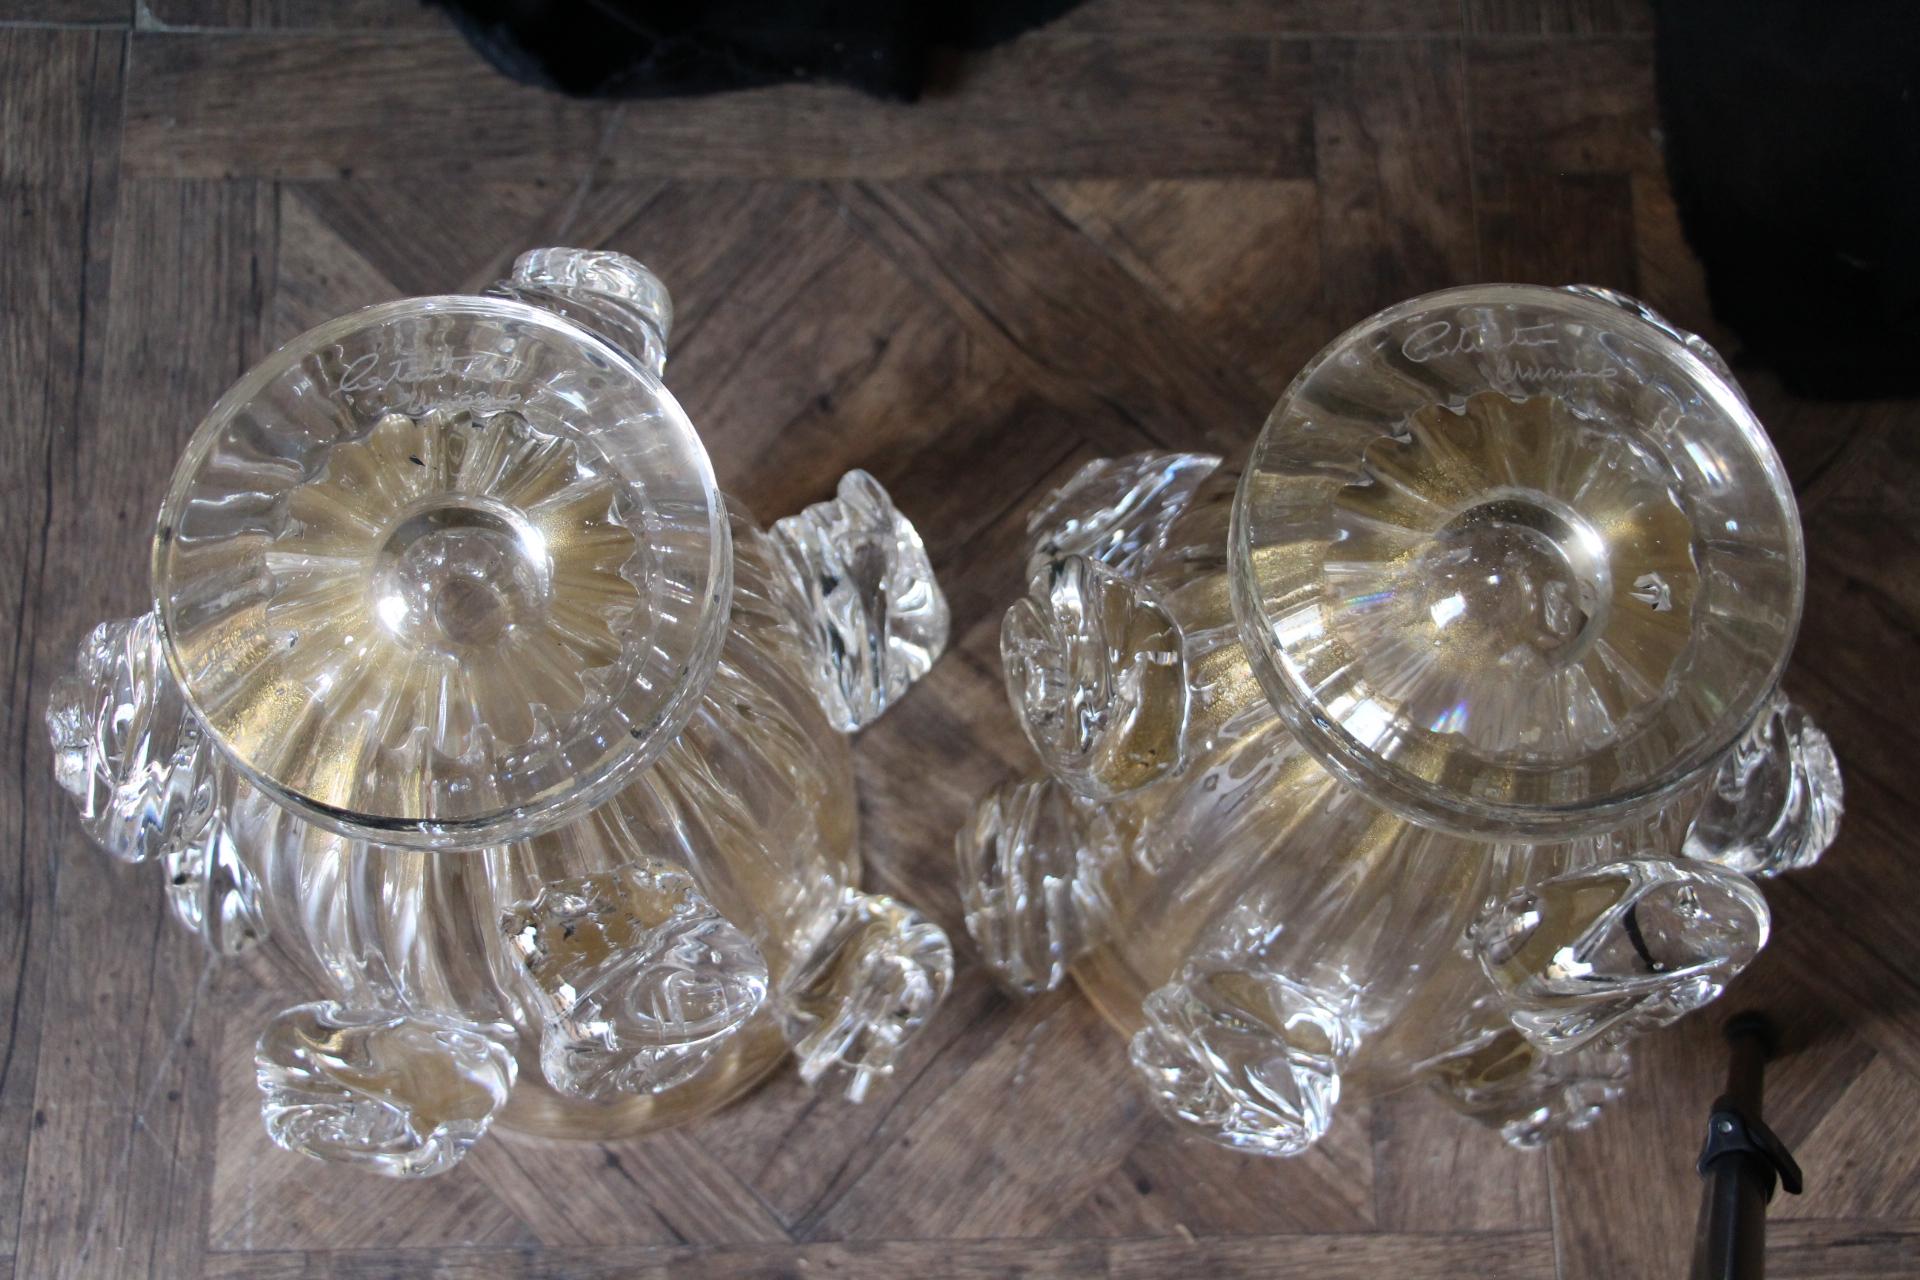 Pair of Large Golden Murano Glass Vases With Roses Decor by Costantini For Sale 9